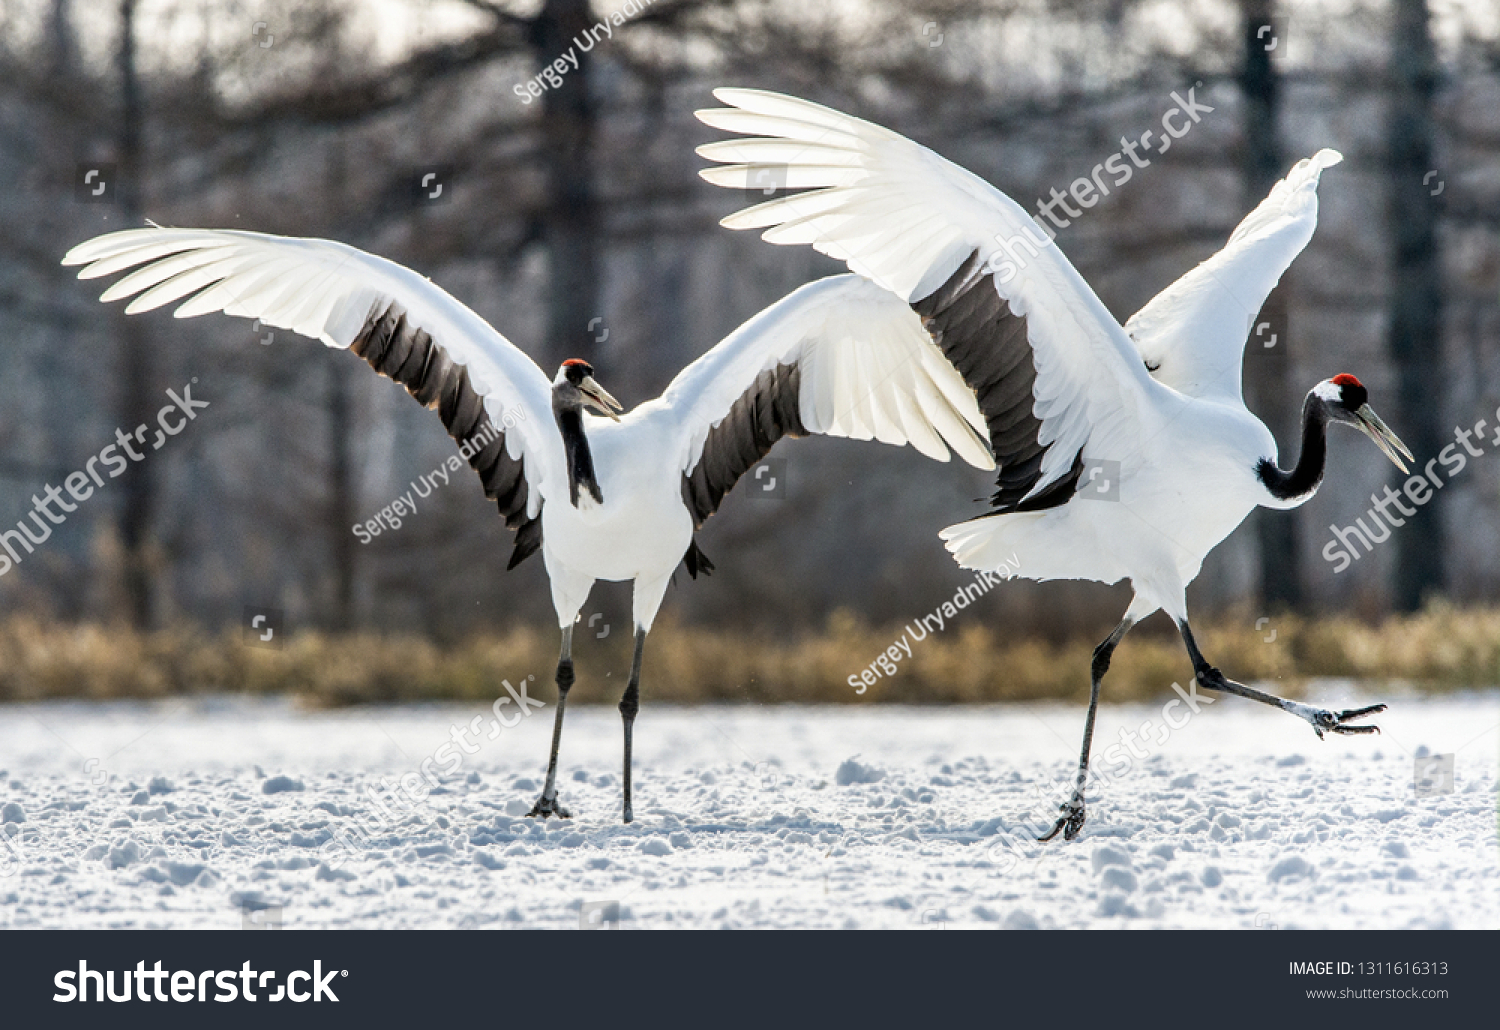 Dancing Cranes. The ritual marriage dance of cranes. The red-crowned crane. Scientific name: Grus japonensis, also called the Japanese crane or Manchurian crane, is a large East Asian Crane. #1311616313